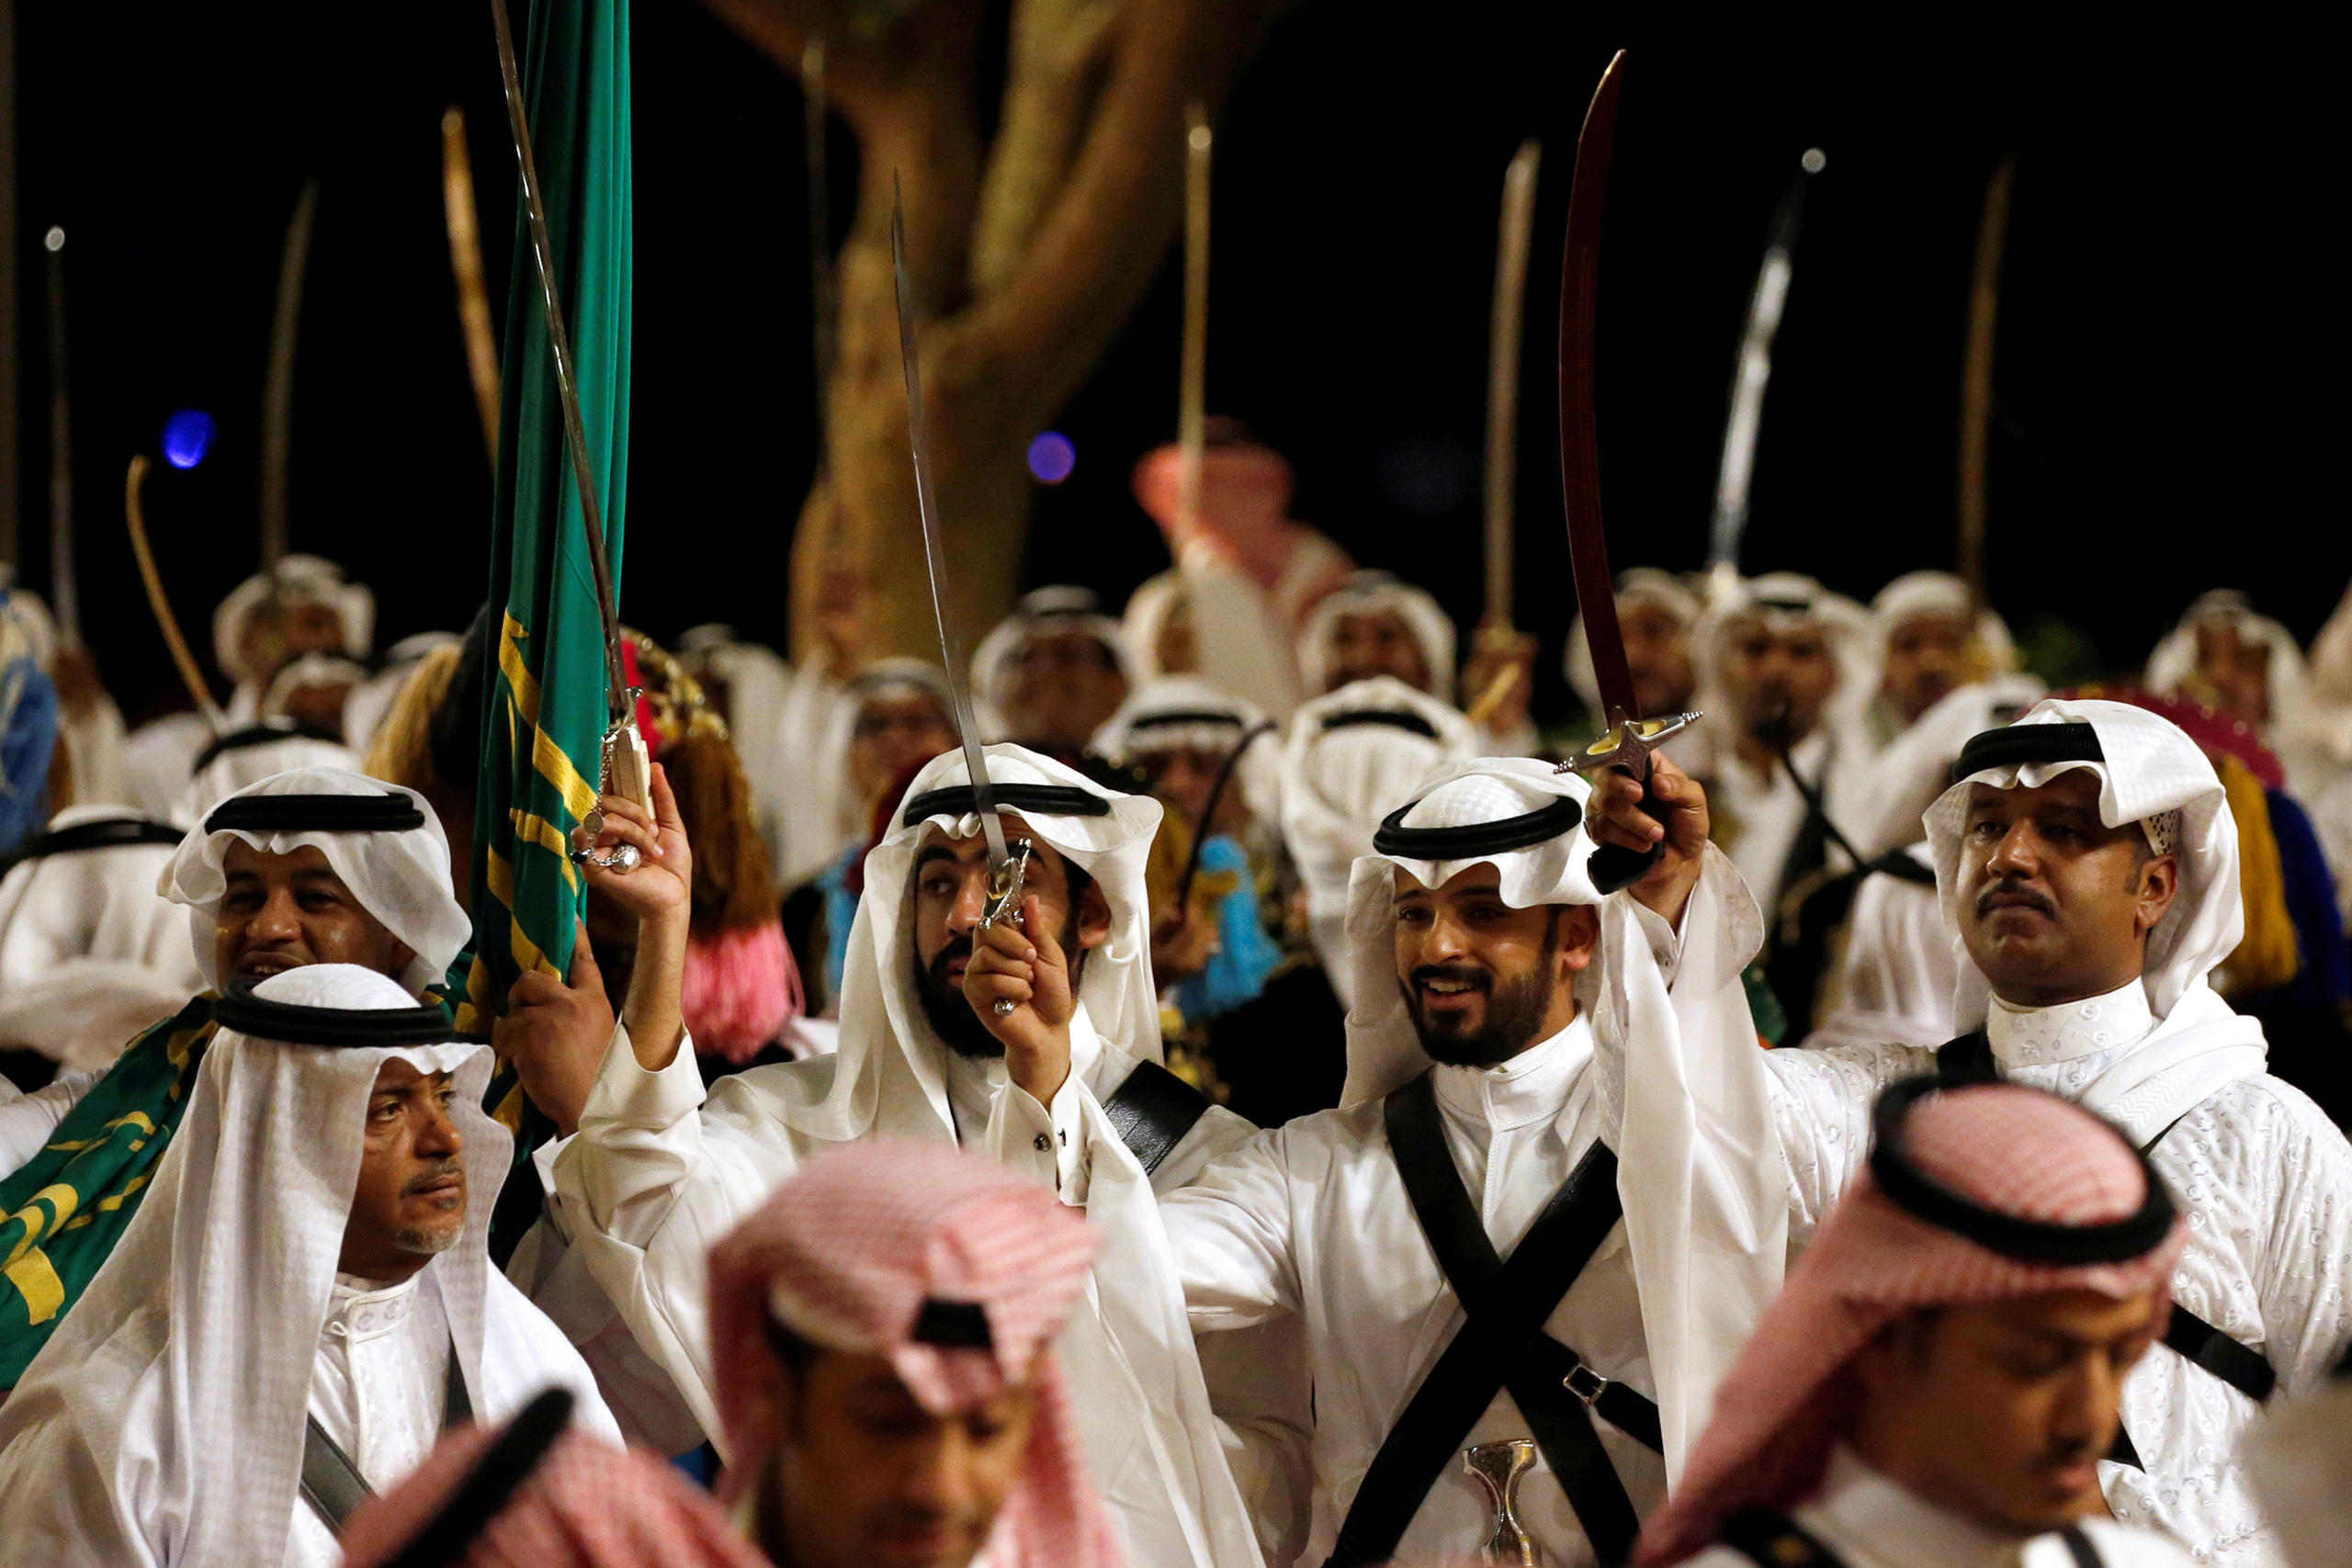 Men holding aloft swords during a welcoming ceremony for US President Trump in Riyadh